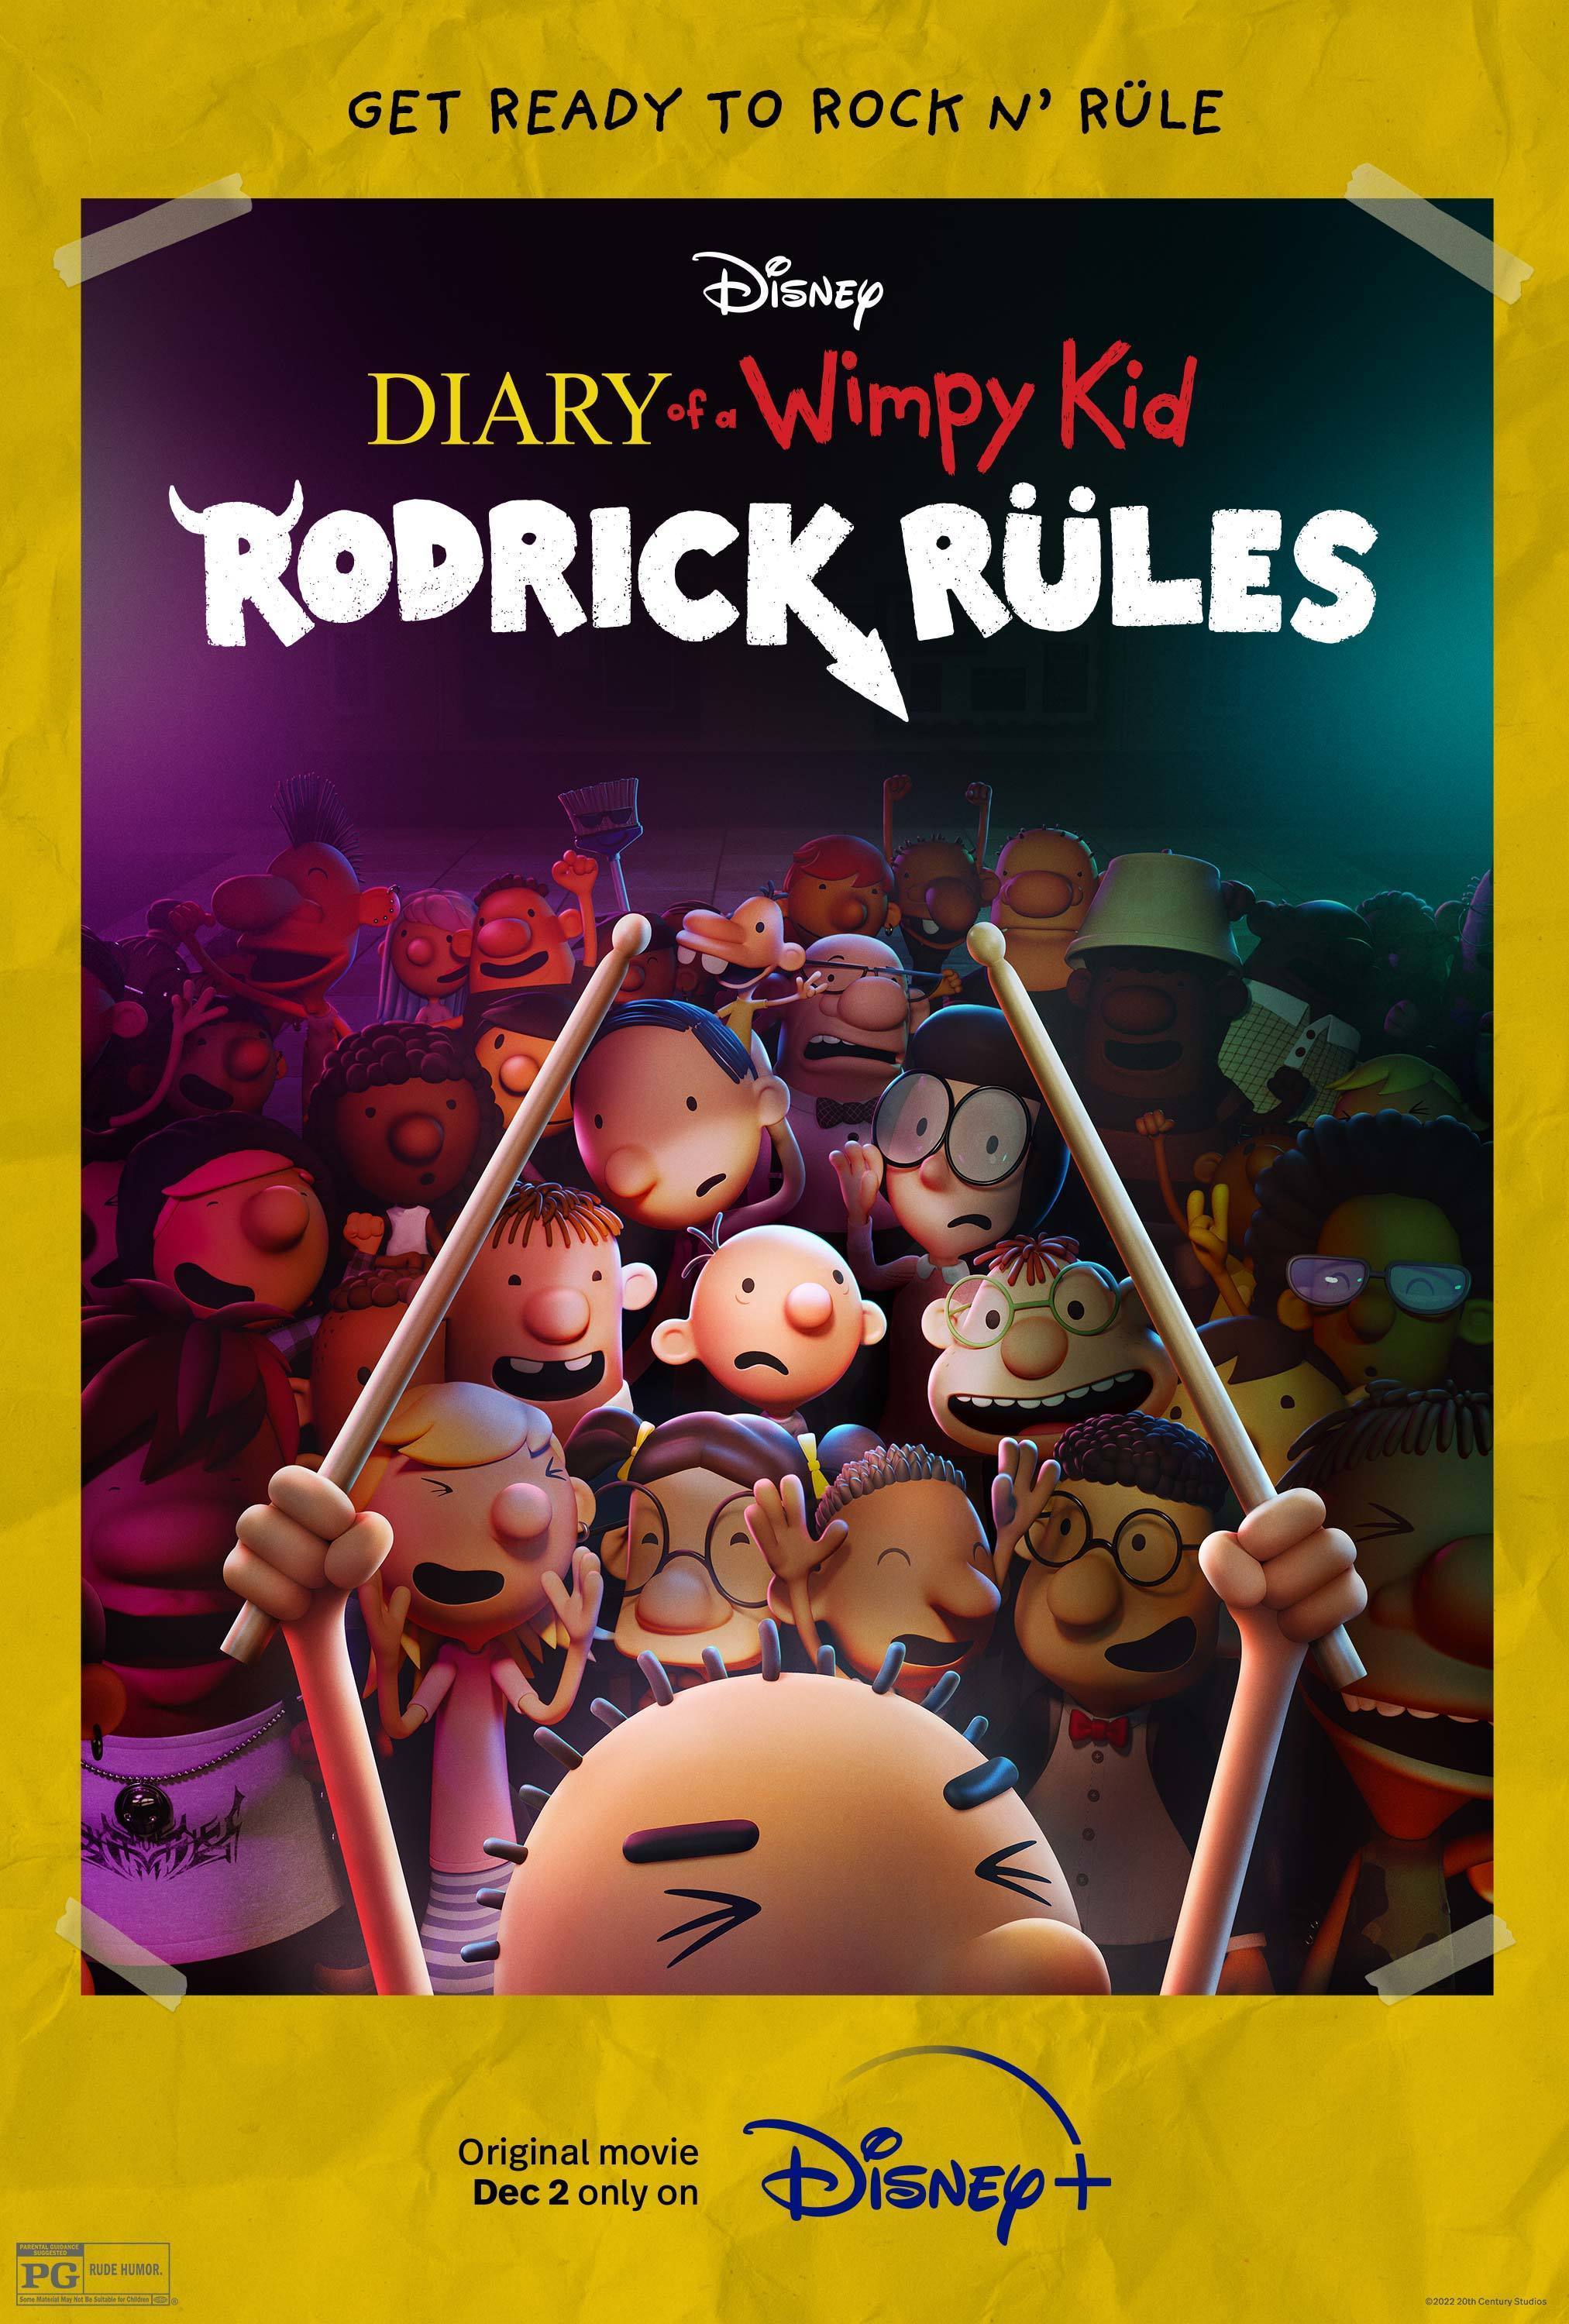 TRAILER AND KEY ART FOR DISNEY+ ORIGINAL MOVIE “DIARY OF A WIMPY KID:  RODRICK RULES” AVAILABLE NOW | UK Press